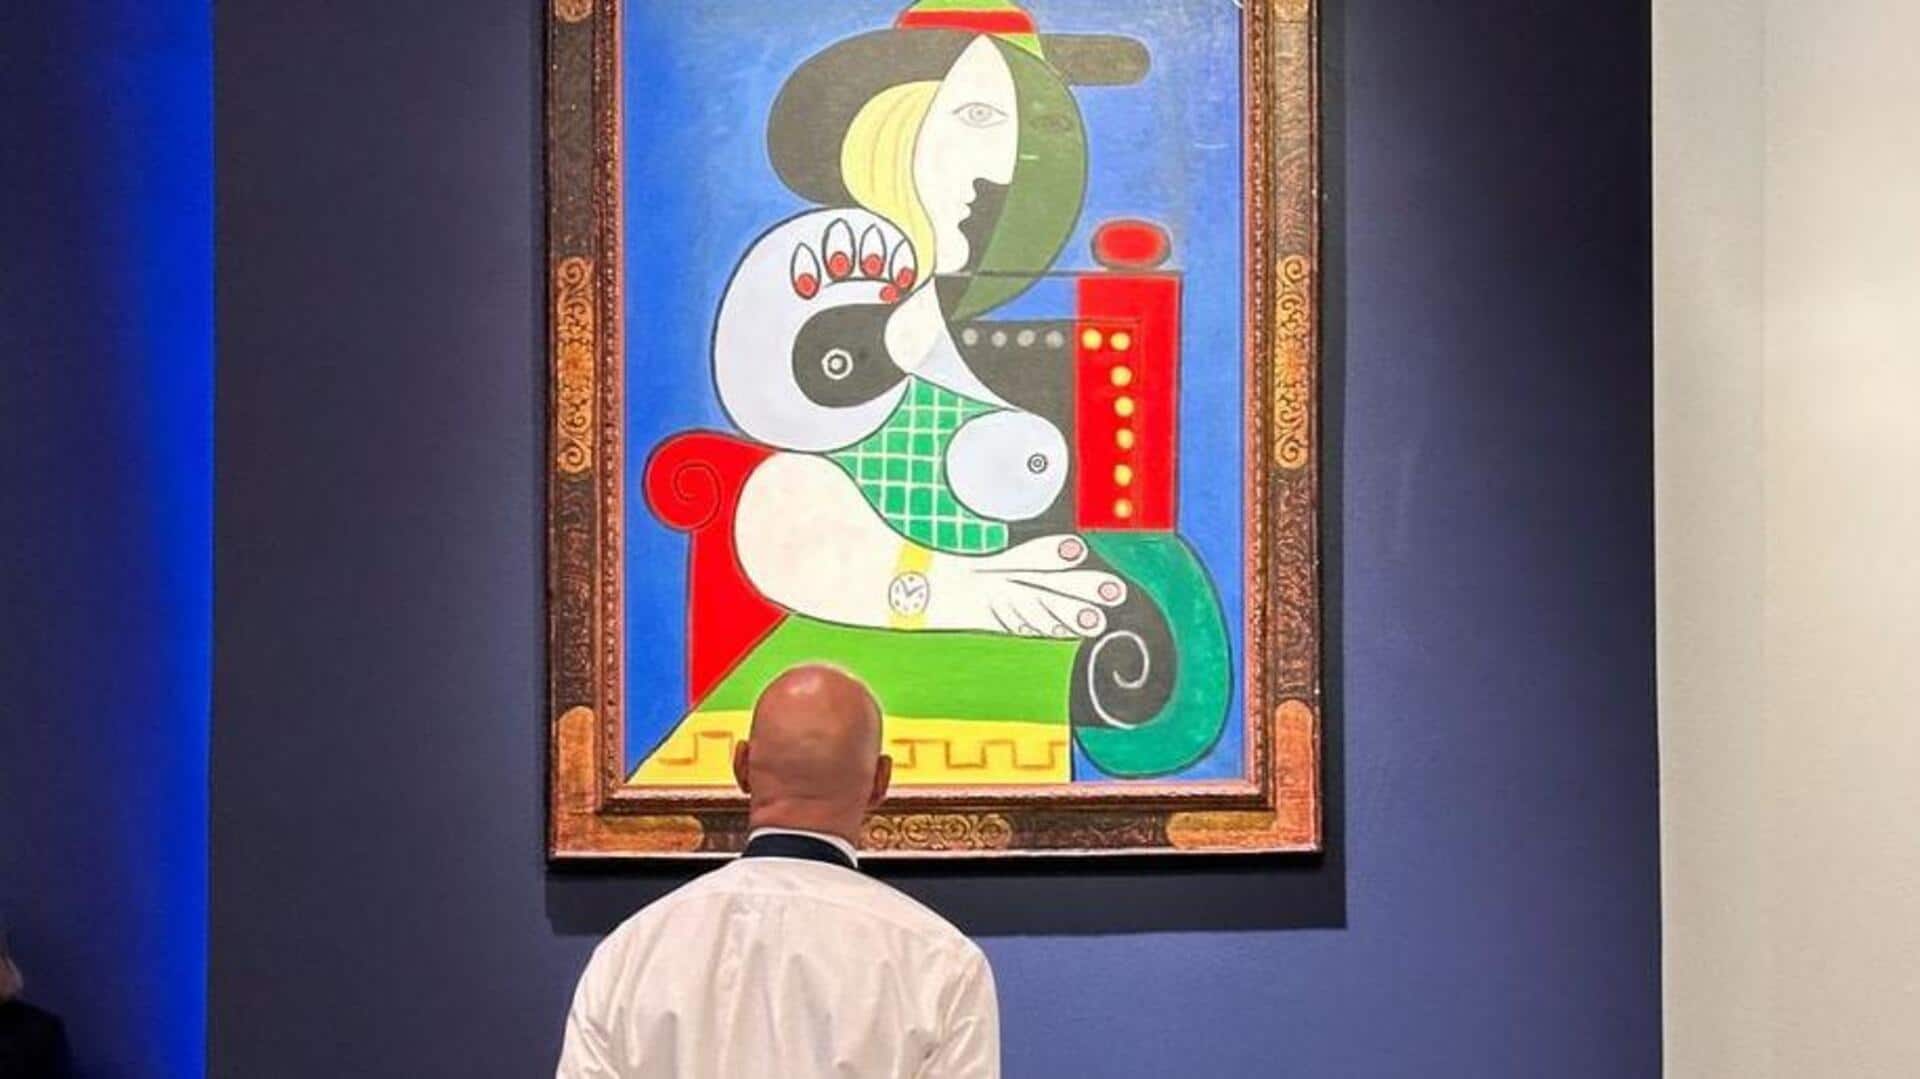 Picasso's painting sells for $139 million at Sotheby's